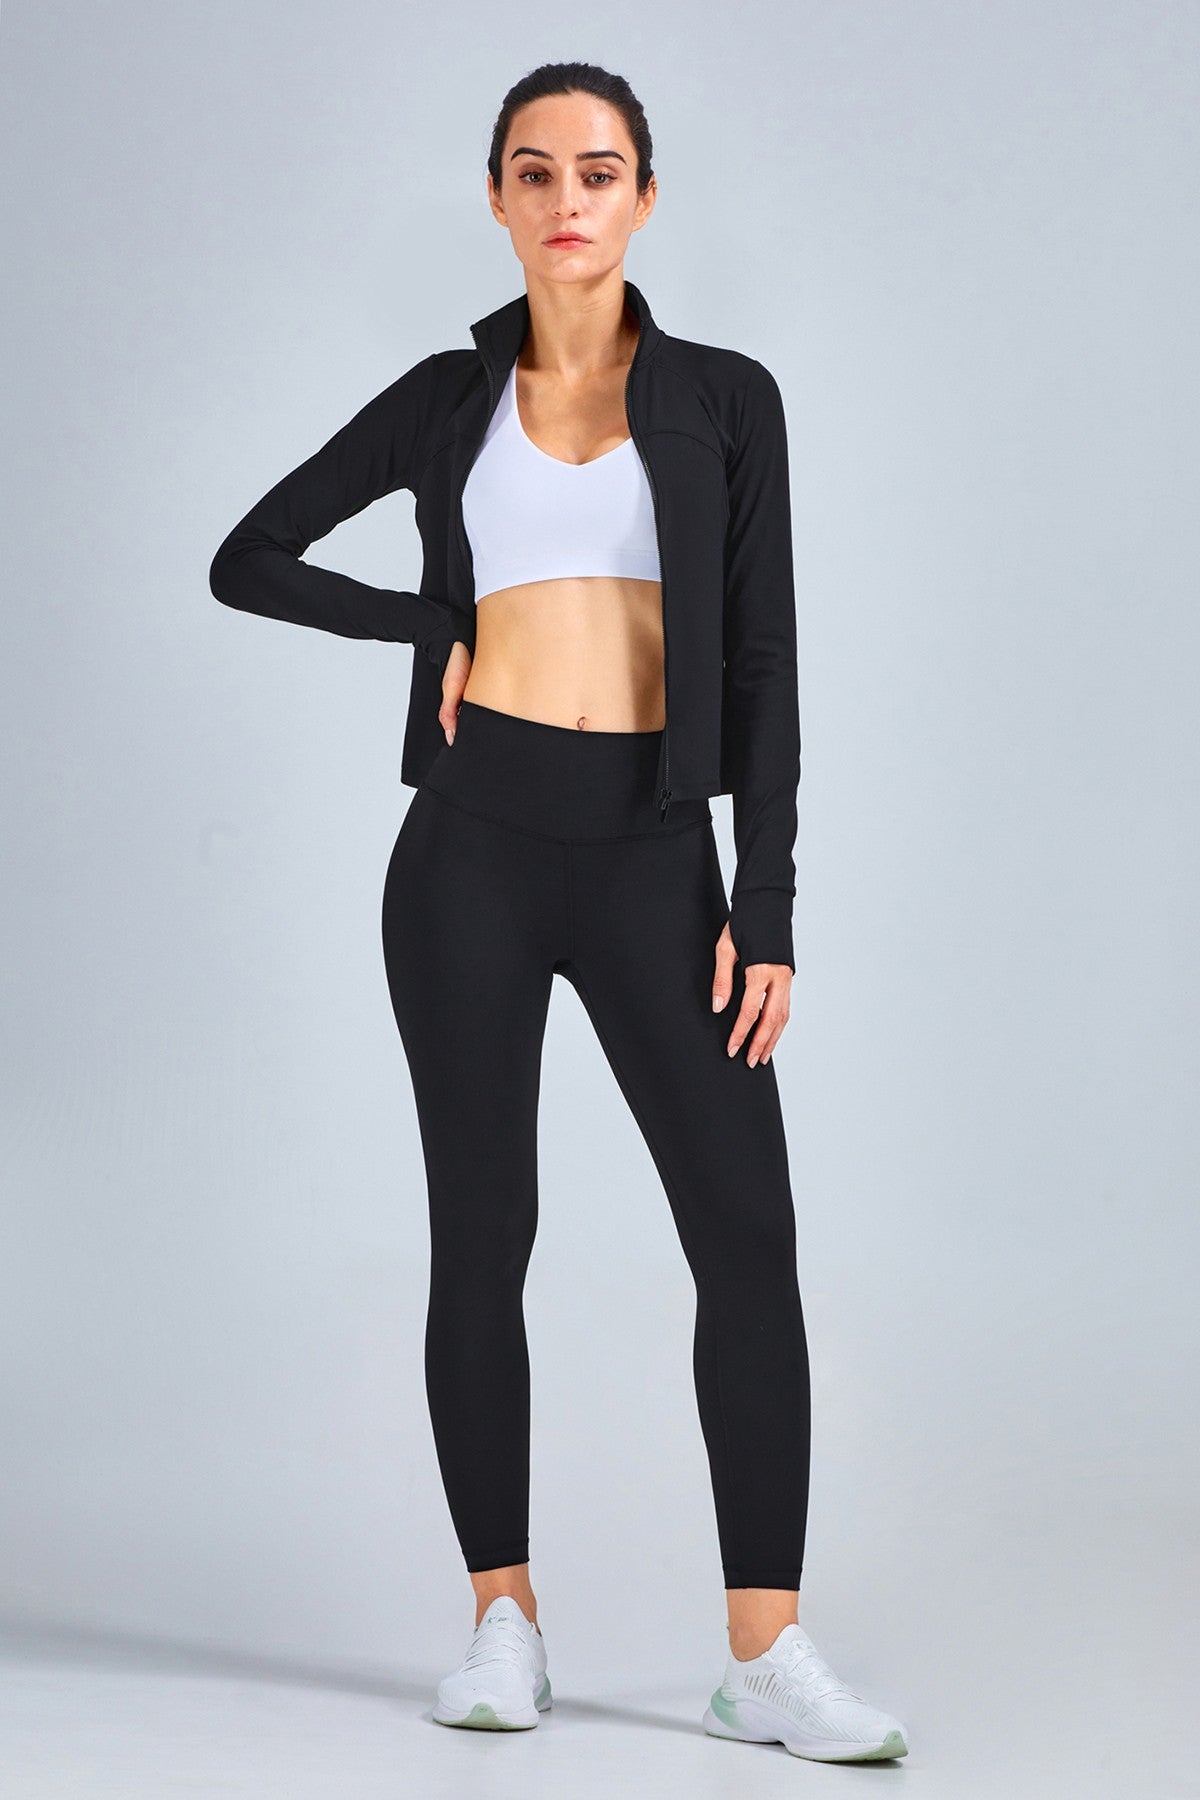 Ribbed Halter Crop Top and Workout Leggings Women Activewear Sets – Zioccie